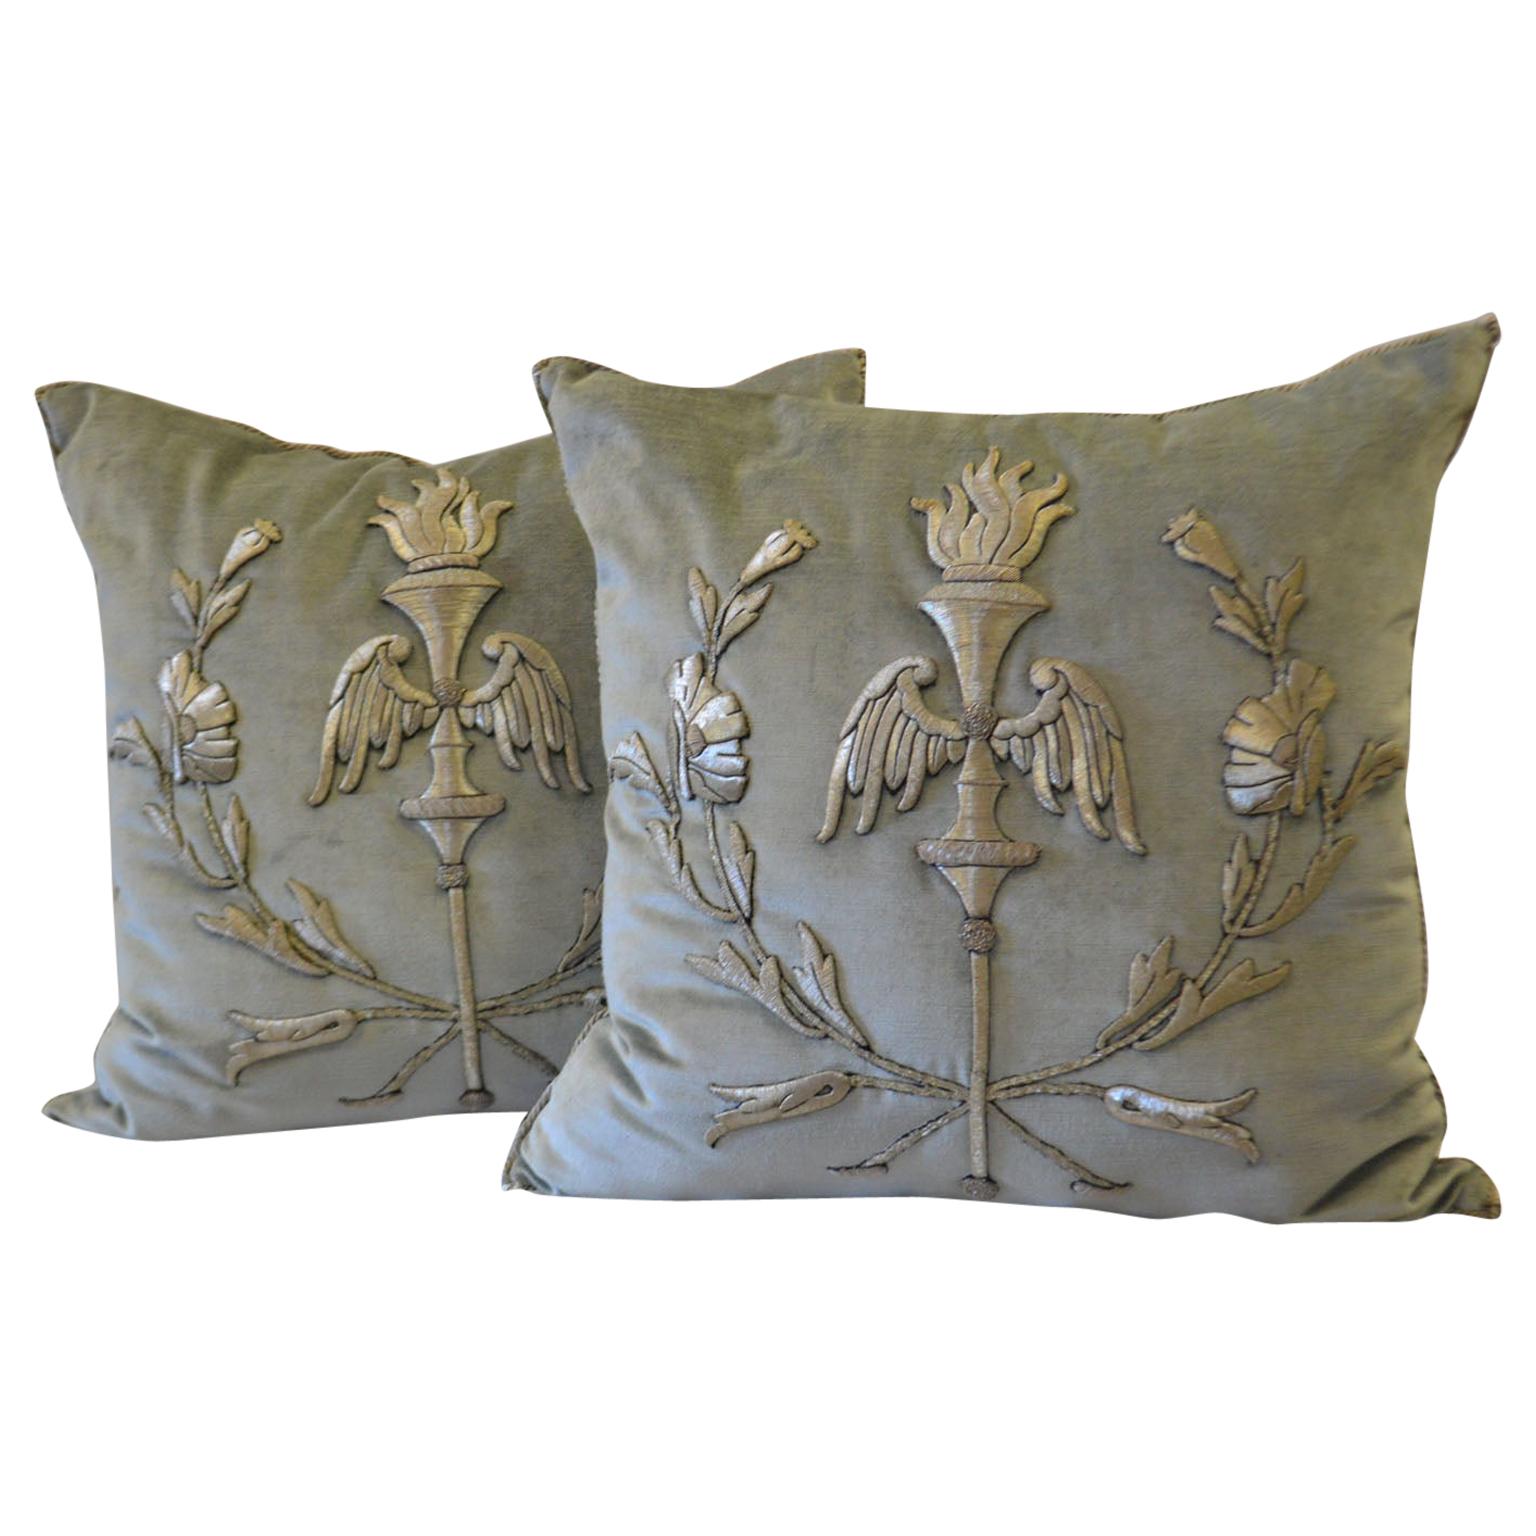 Pair of Embroidery Pillows, Antique trim